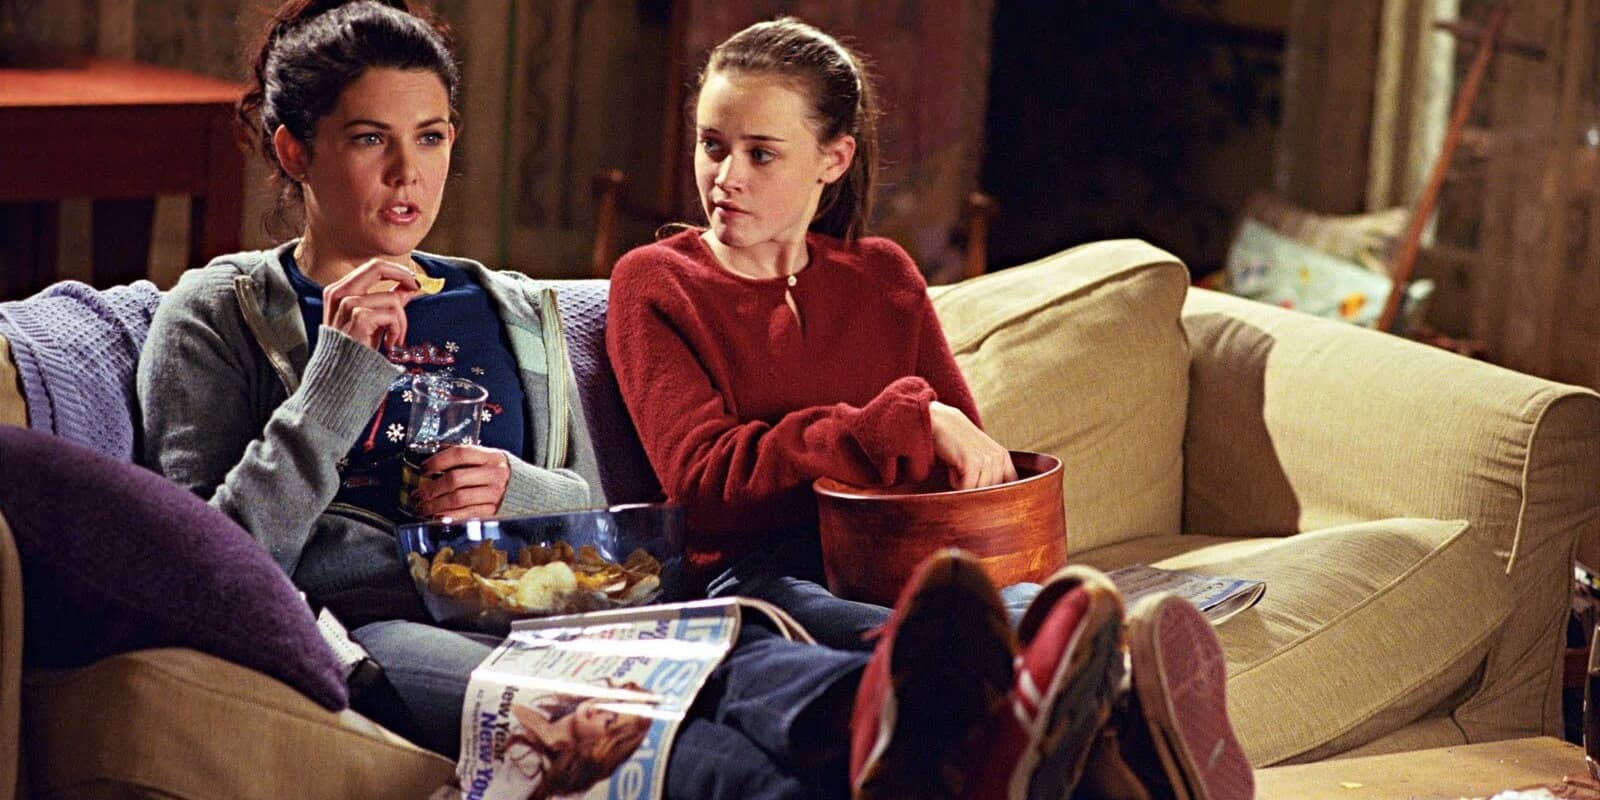 A mother and daughter watch a movie with a myriad of snacks in this image from Warner Bros. Television.